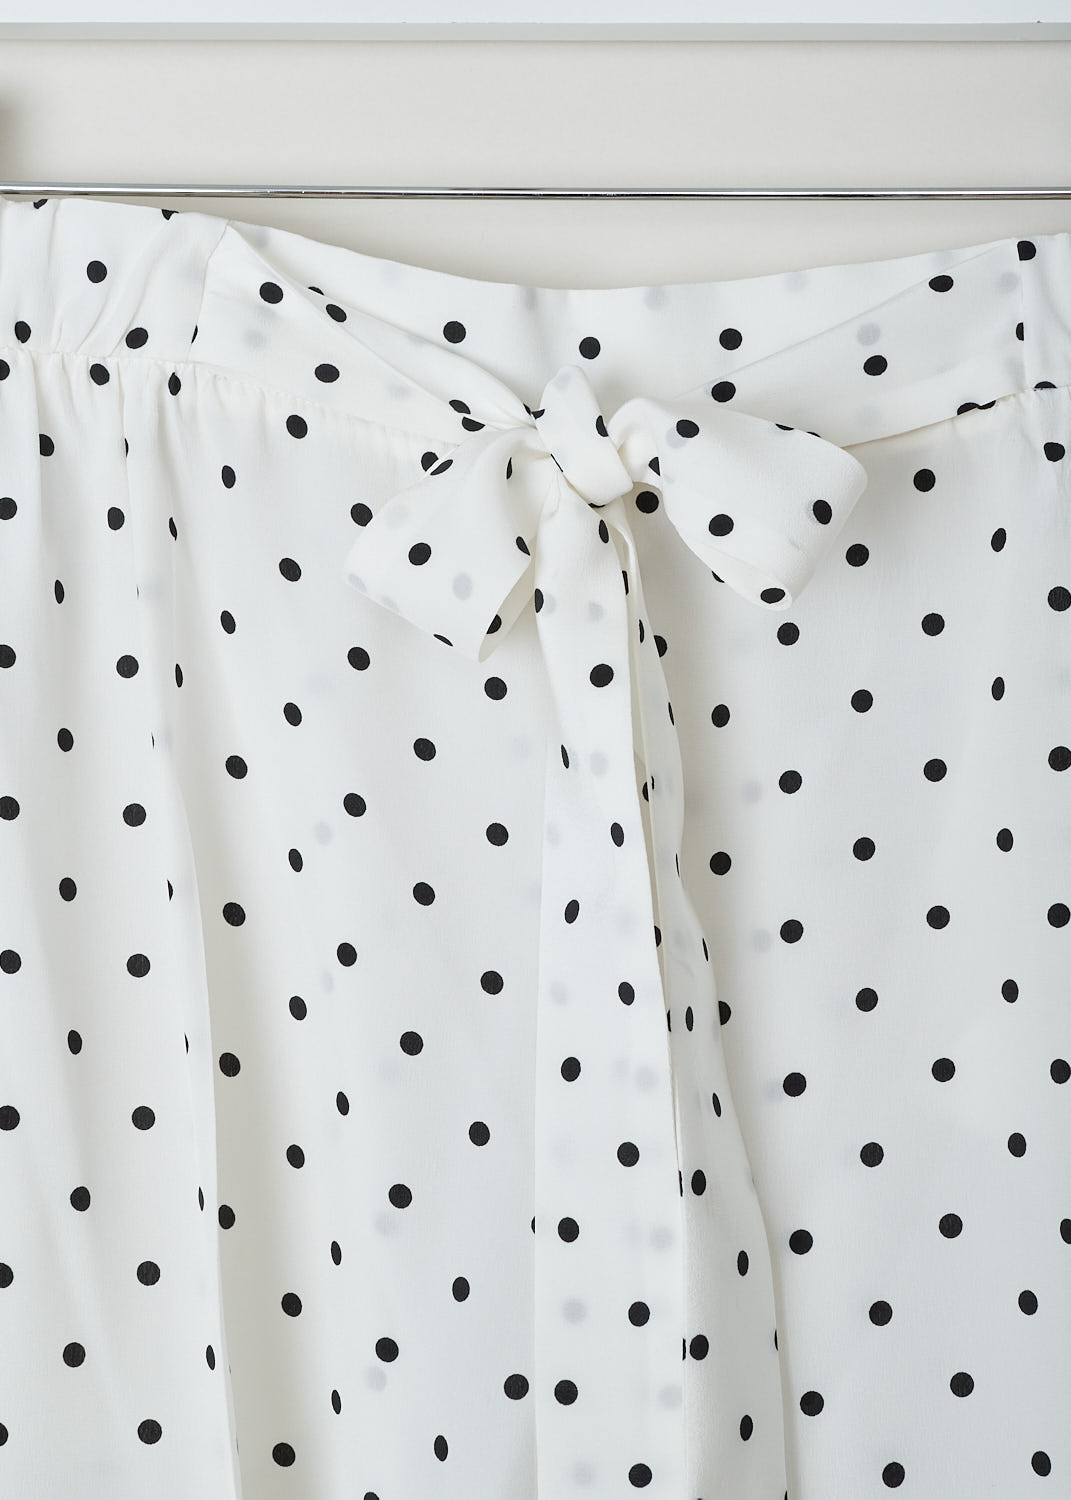 PRADA, WHITE SILK POLKA-DOT PRINT PANTS, CDC_POIS_P225EL_AVORIO_NERO, White, Print, Detail, This fun polka-dot print pants comes with a belted waist. The fabric could be described as semi see through.  A concealed zipper closure can be found along the seam. The pants has slanted pockets on each side. 